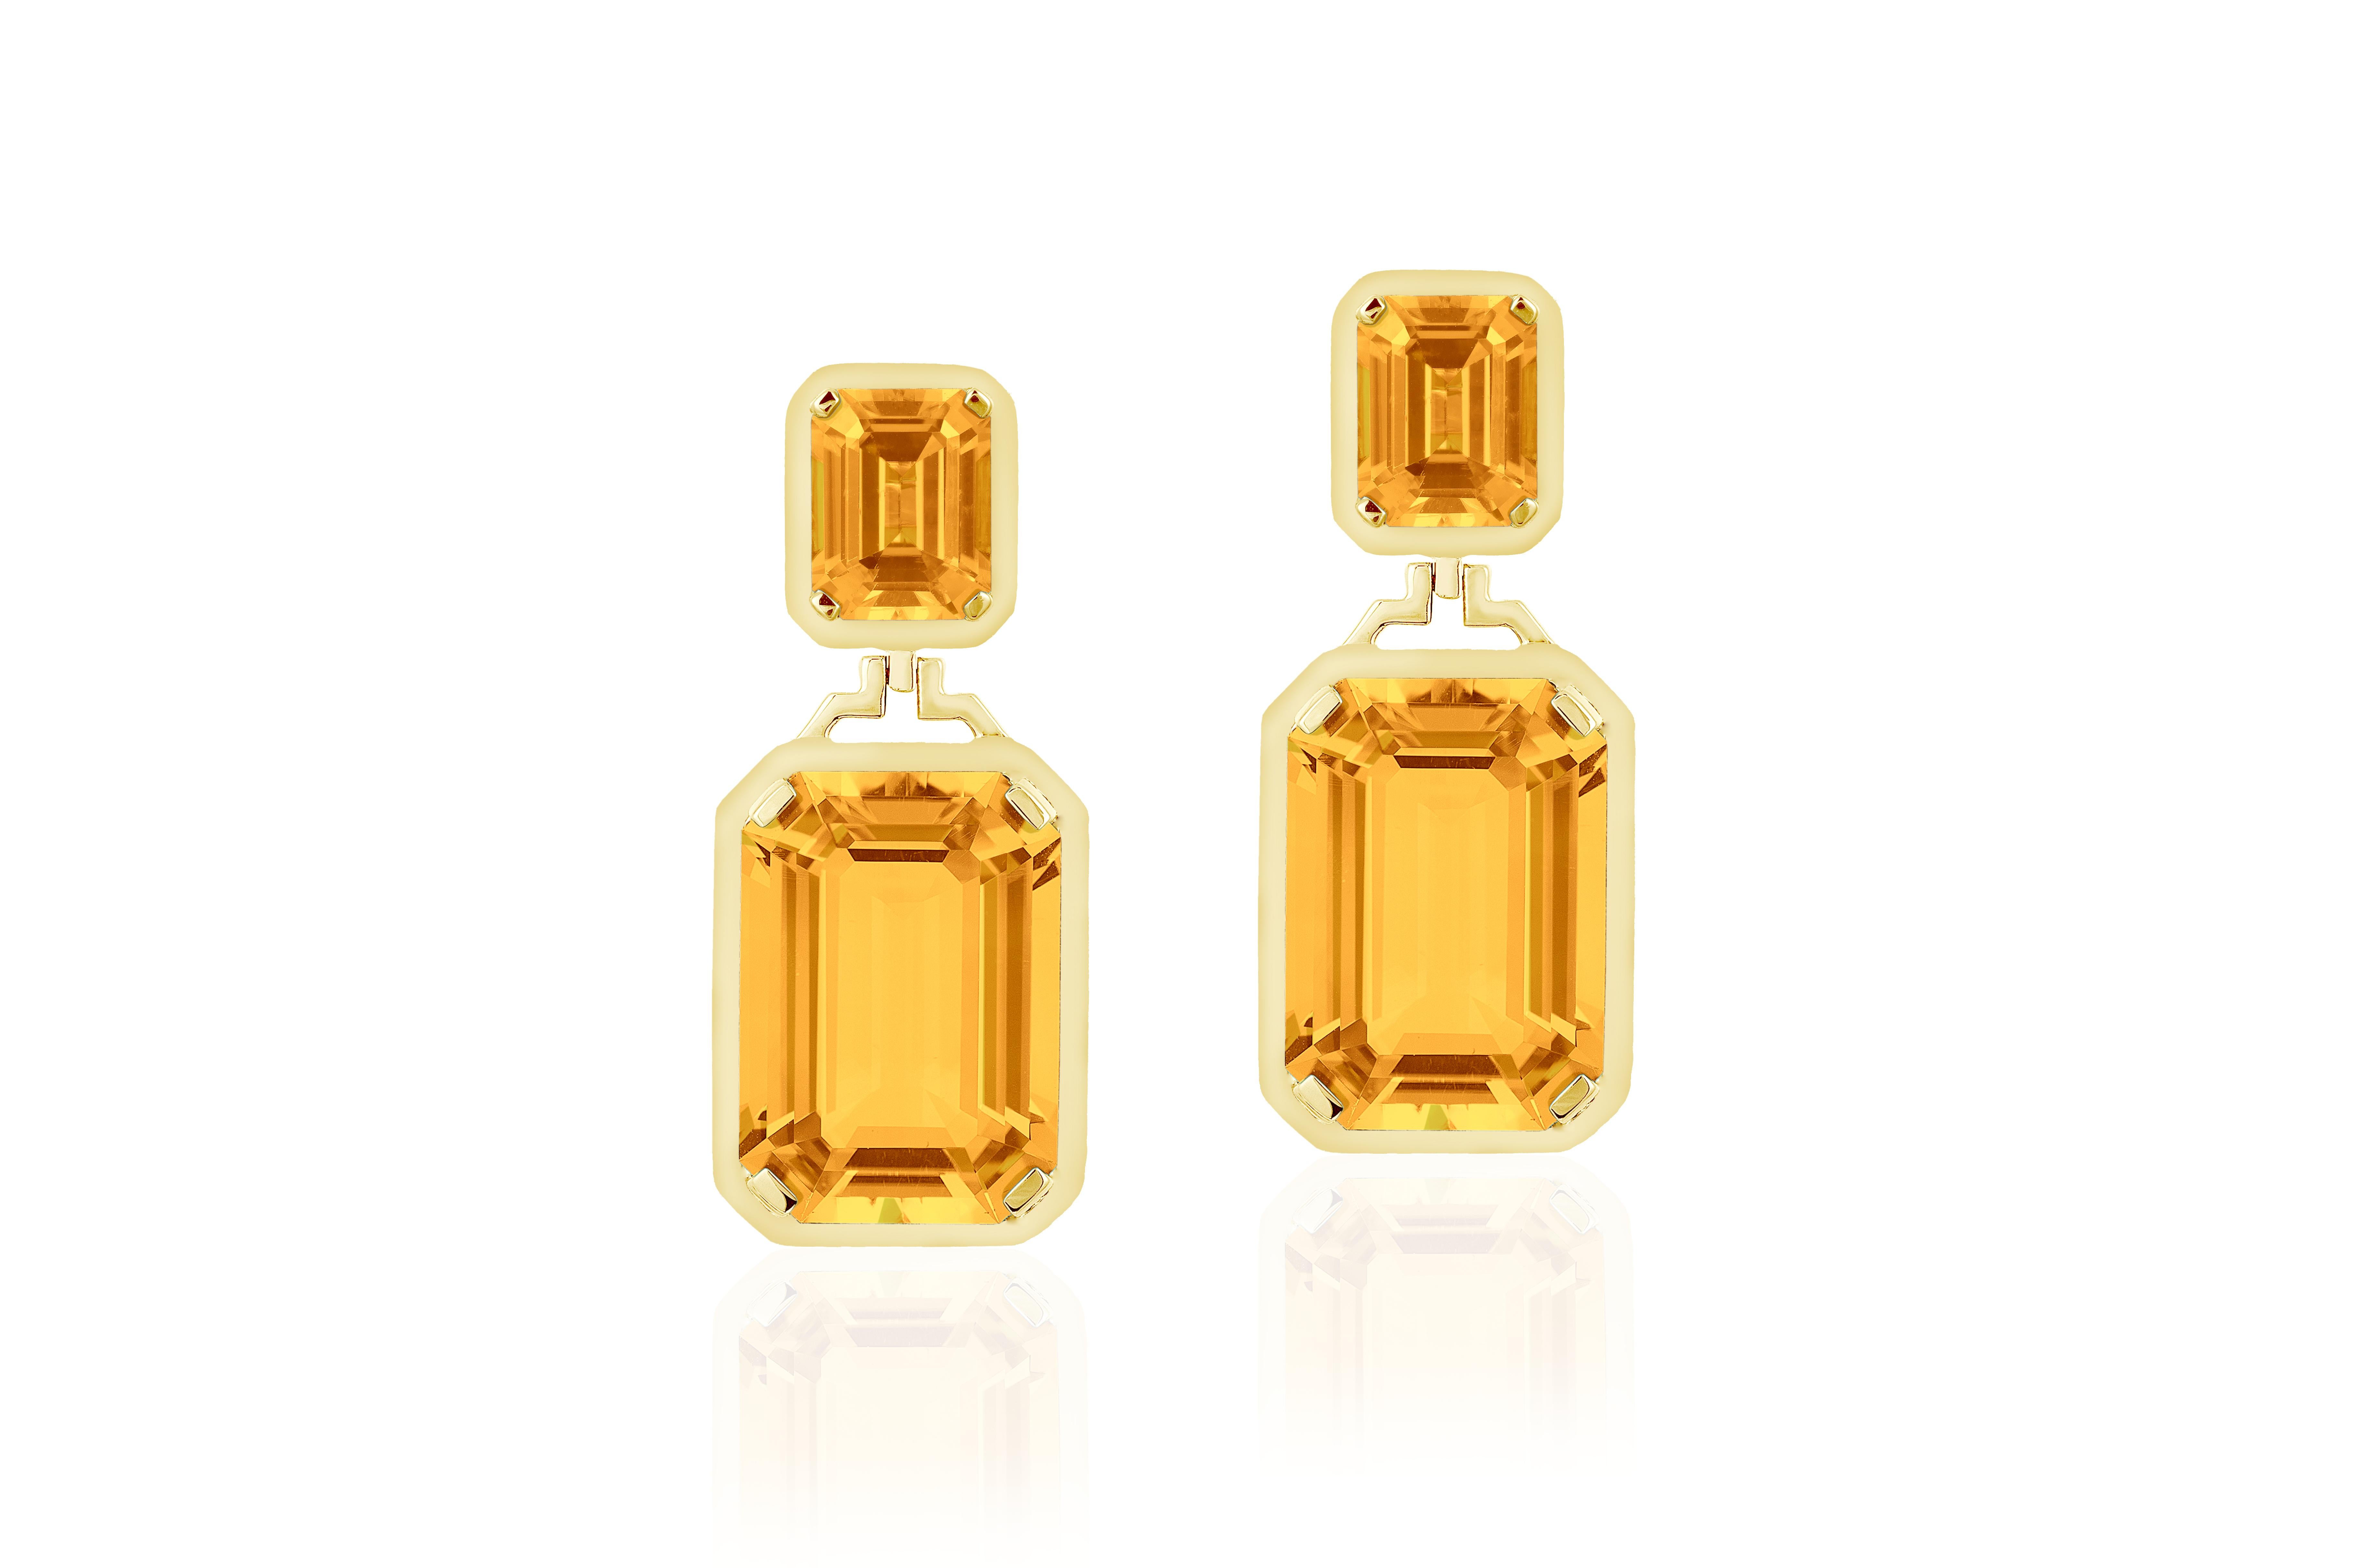 Double Emerald Cut Citrine Long Earrings in 18K Yellow Gold, from 'Gossip' Collection

Stone Size: 10 x 8 - 20 x 14 mm